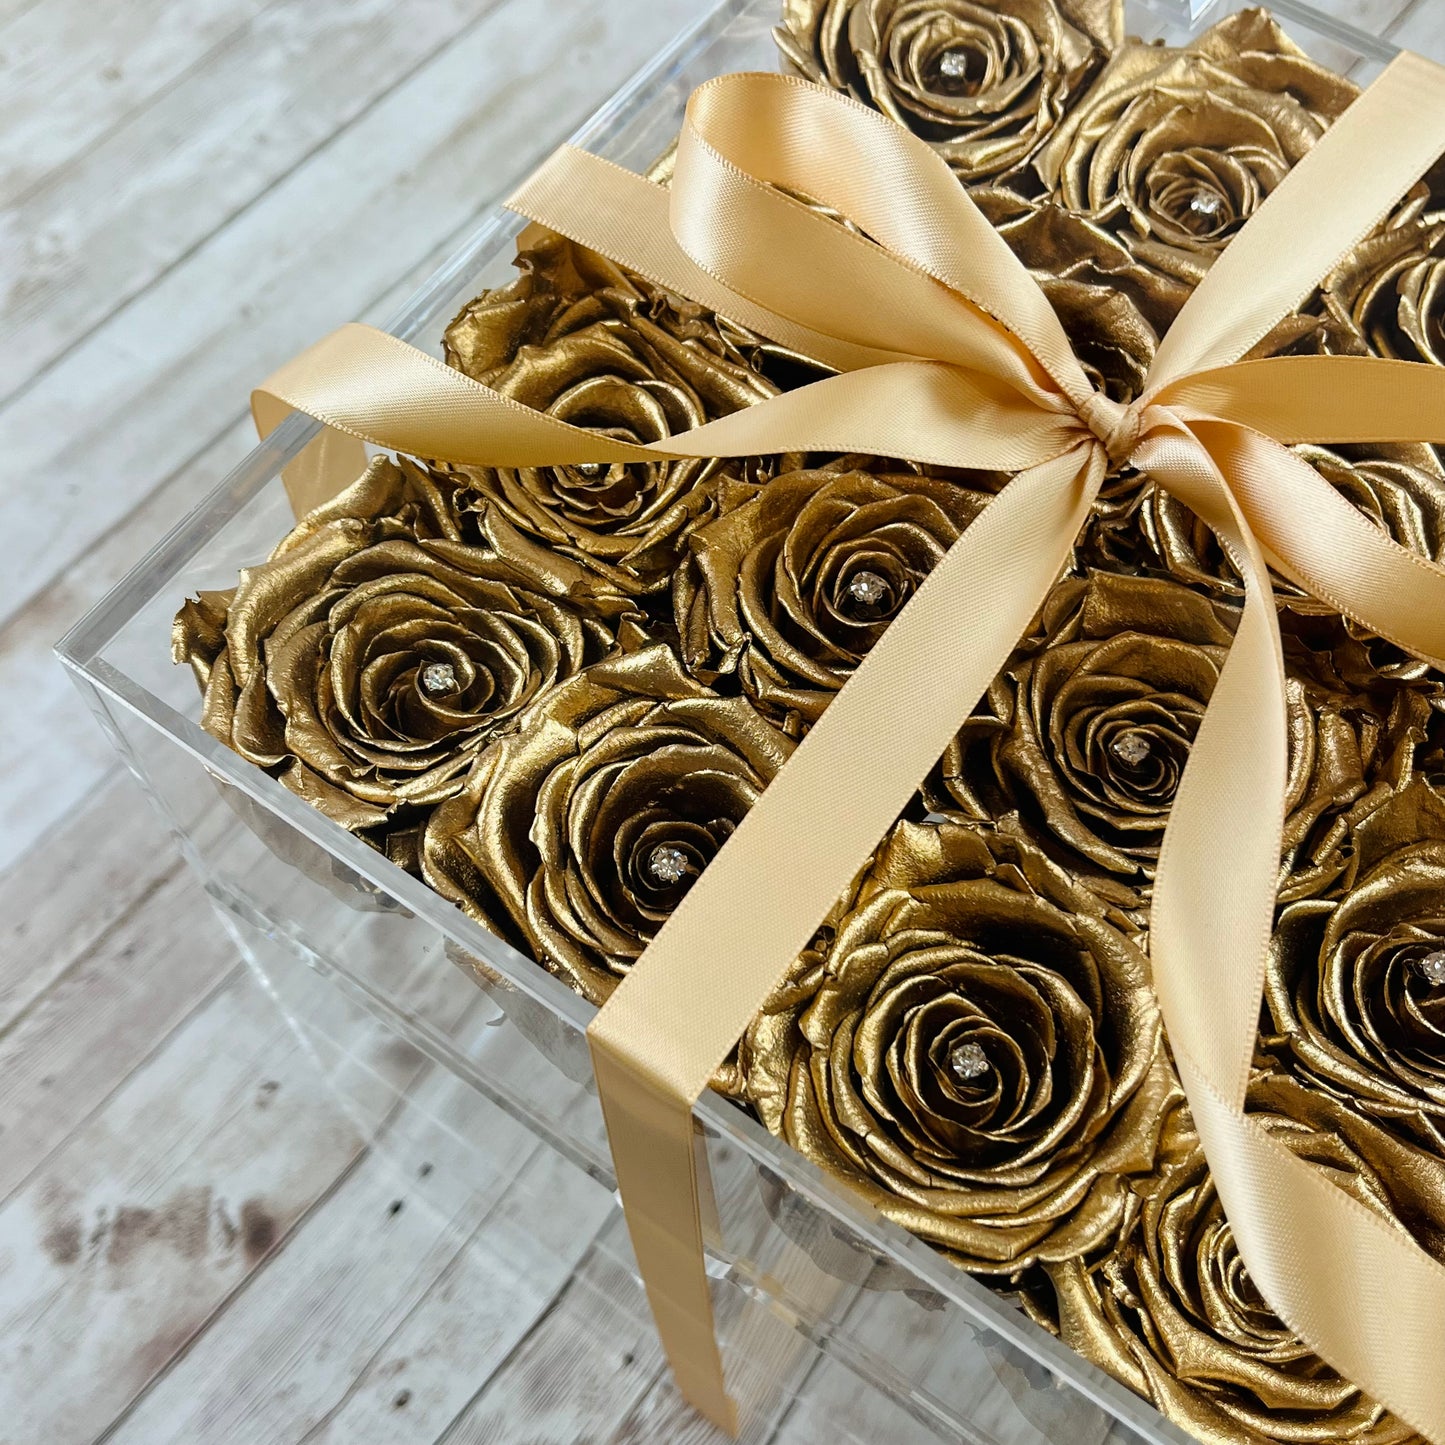 Infinity Rose Makeup Organiser - Gold Infinity Roses - One Year Roses - Rose Colours divider-Glamorous Gold